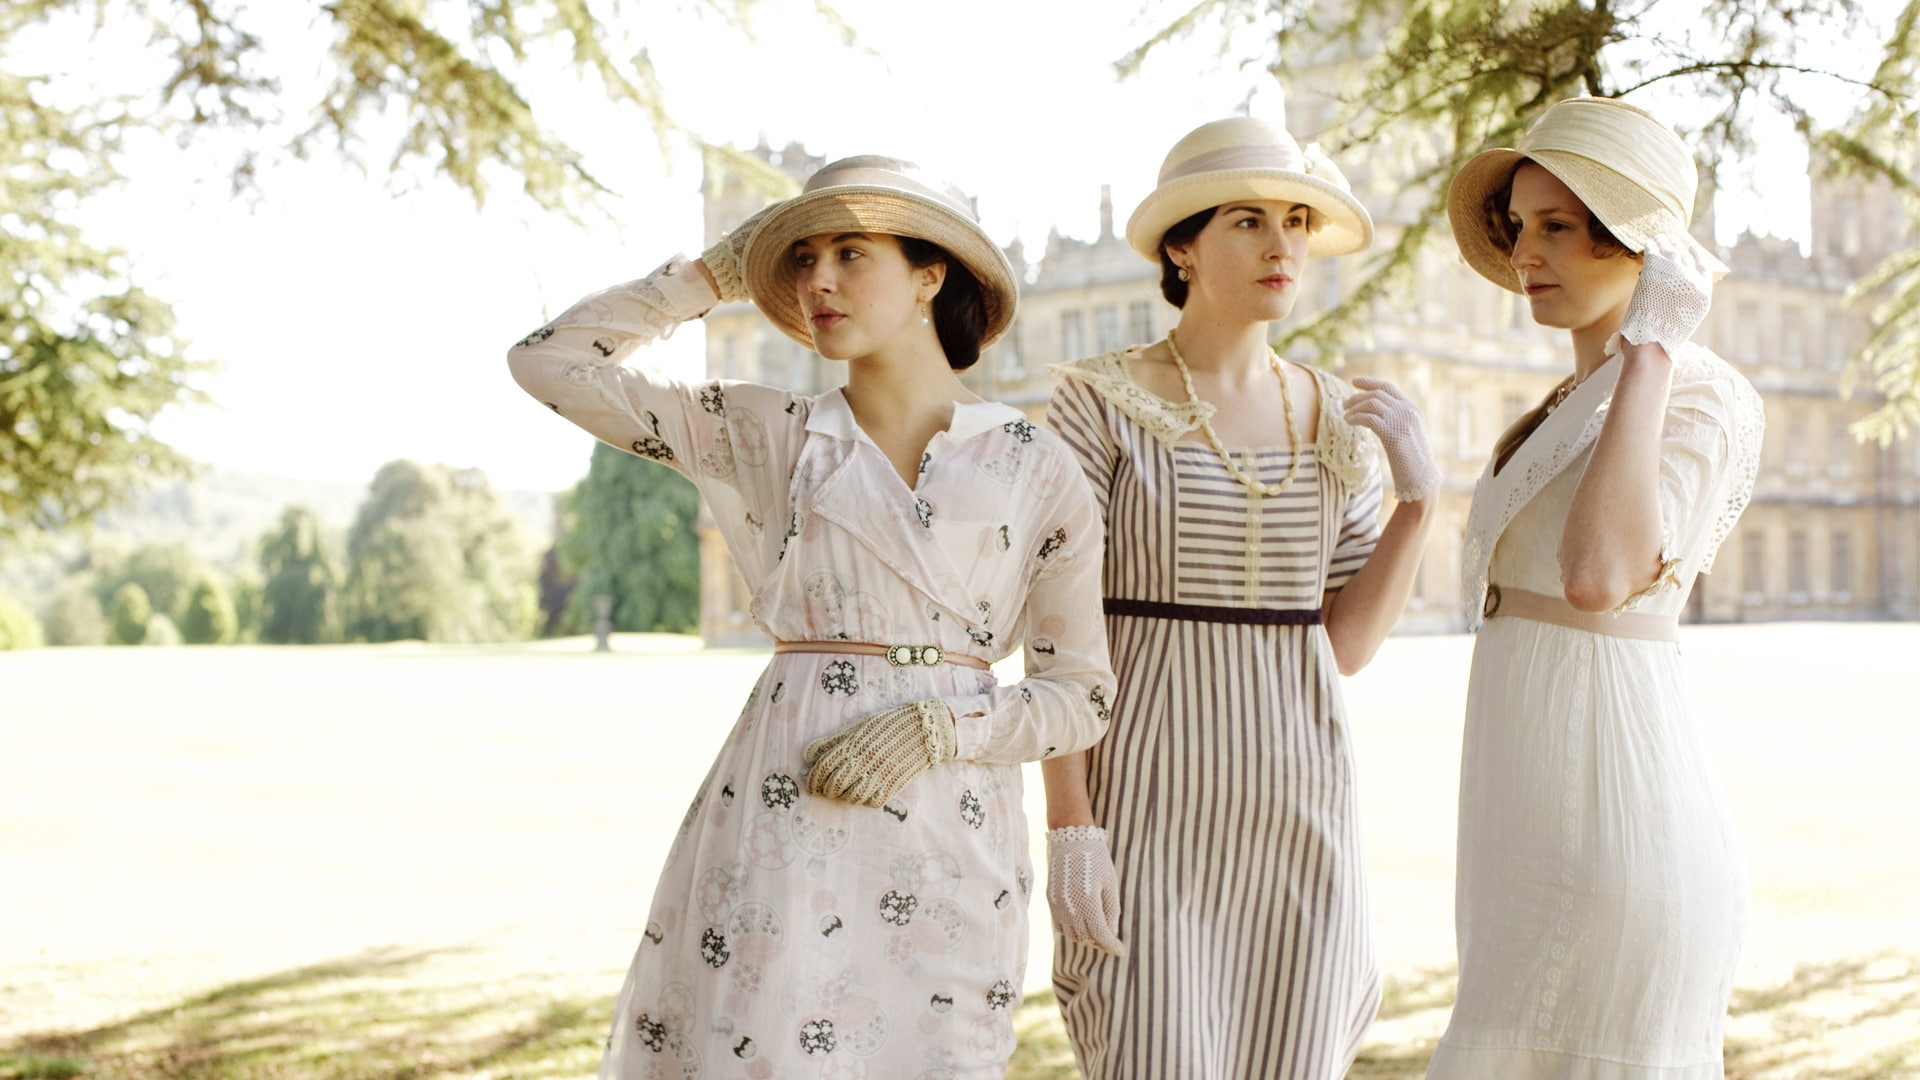 the series, characters, actress, Downton Abbey, Michelle Dockery